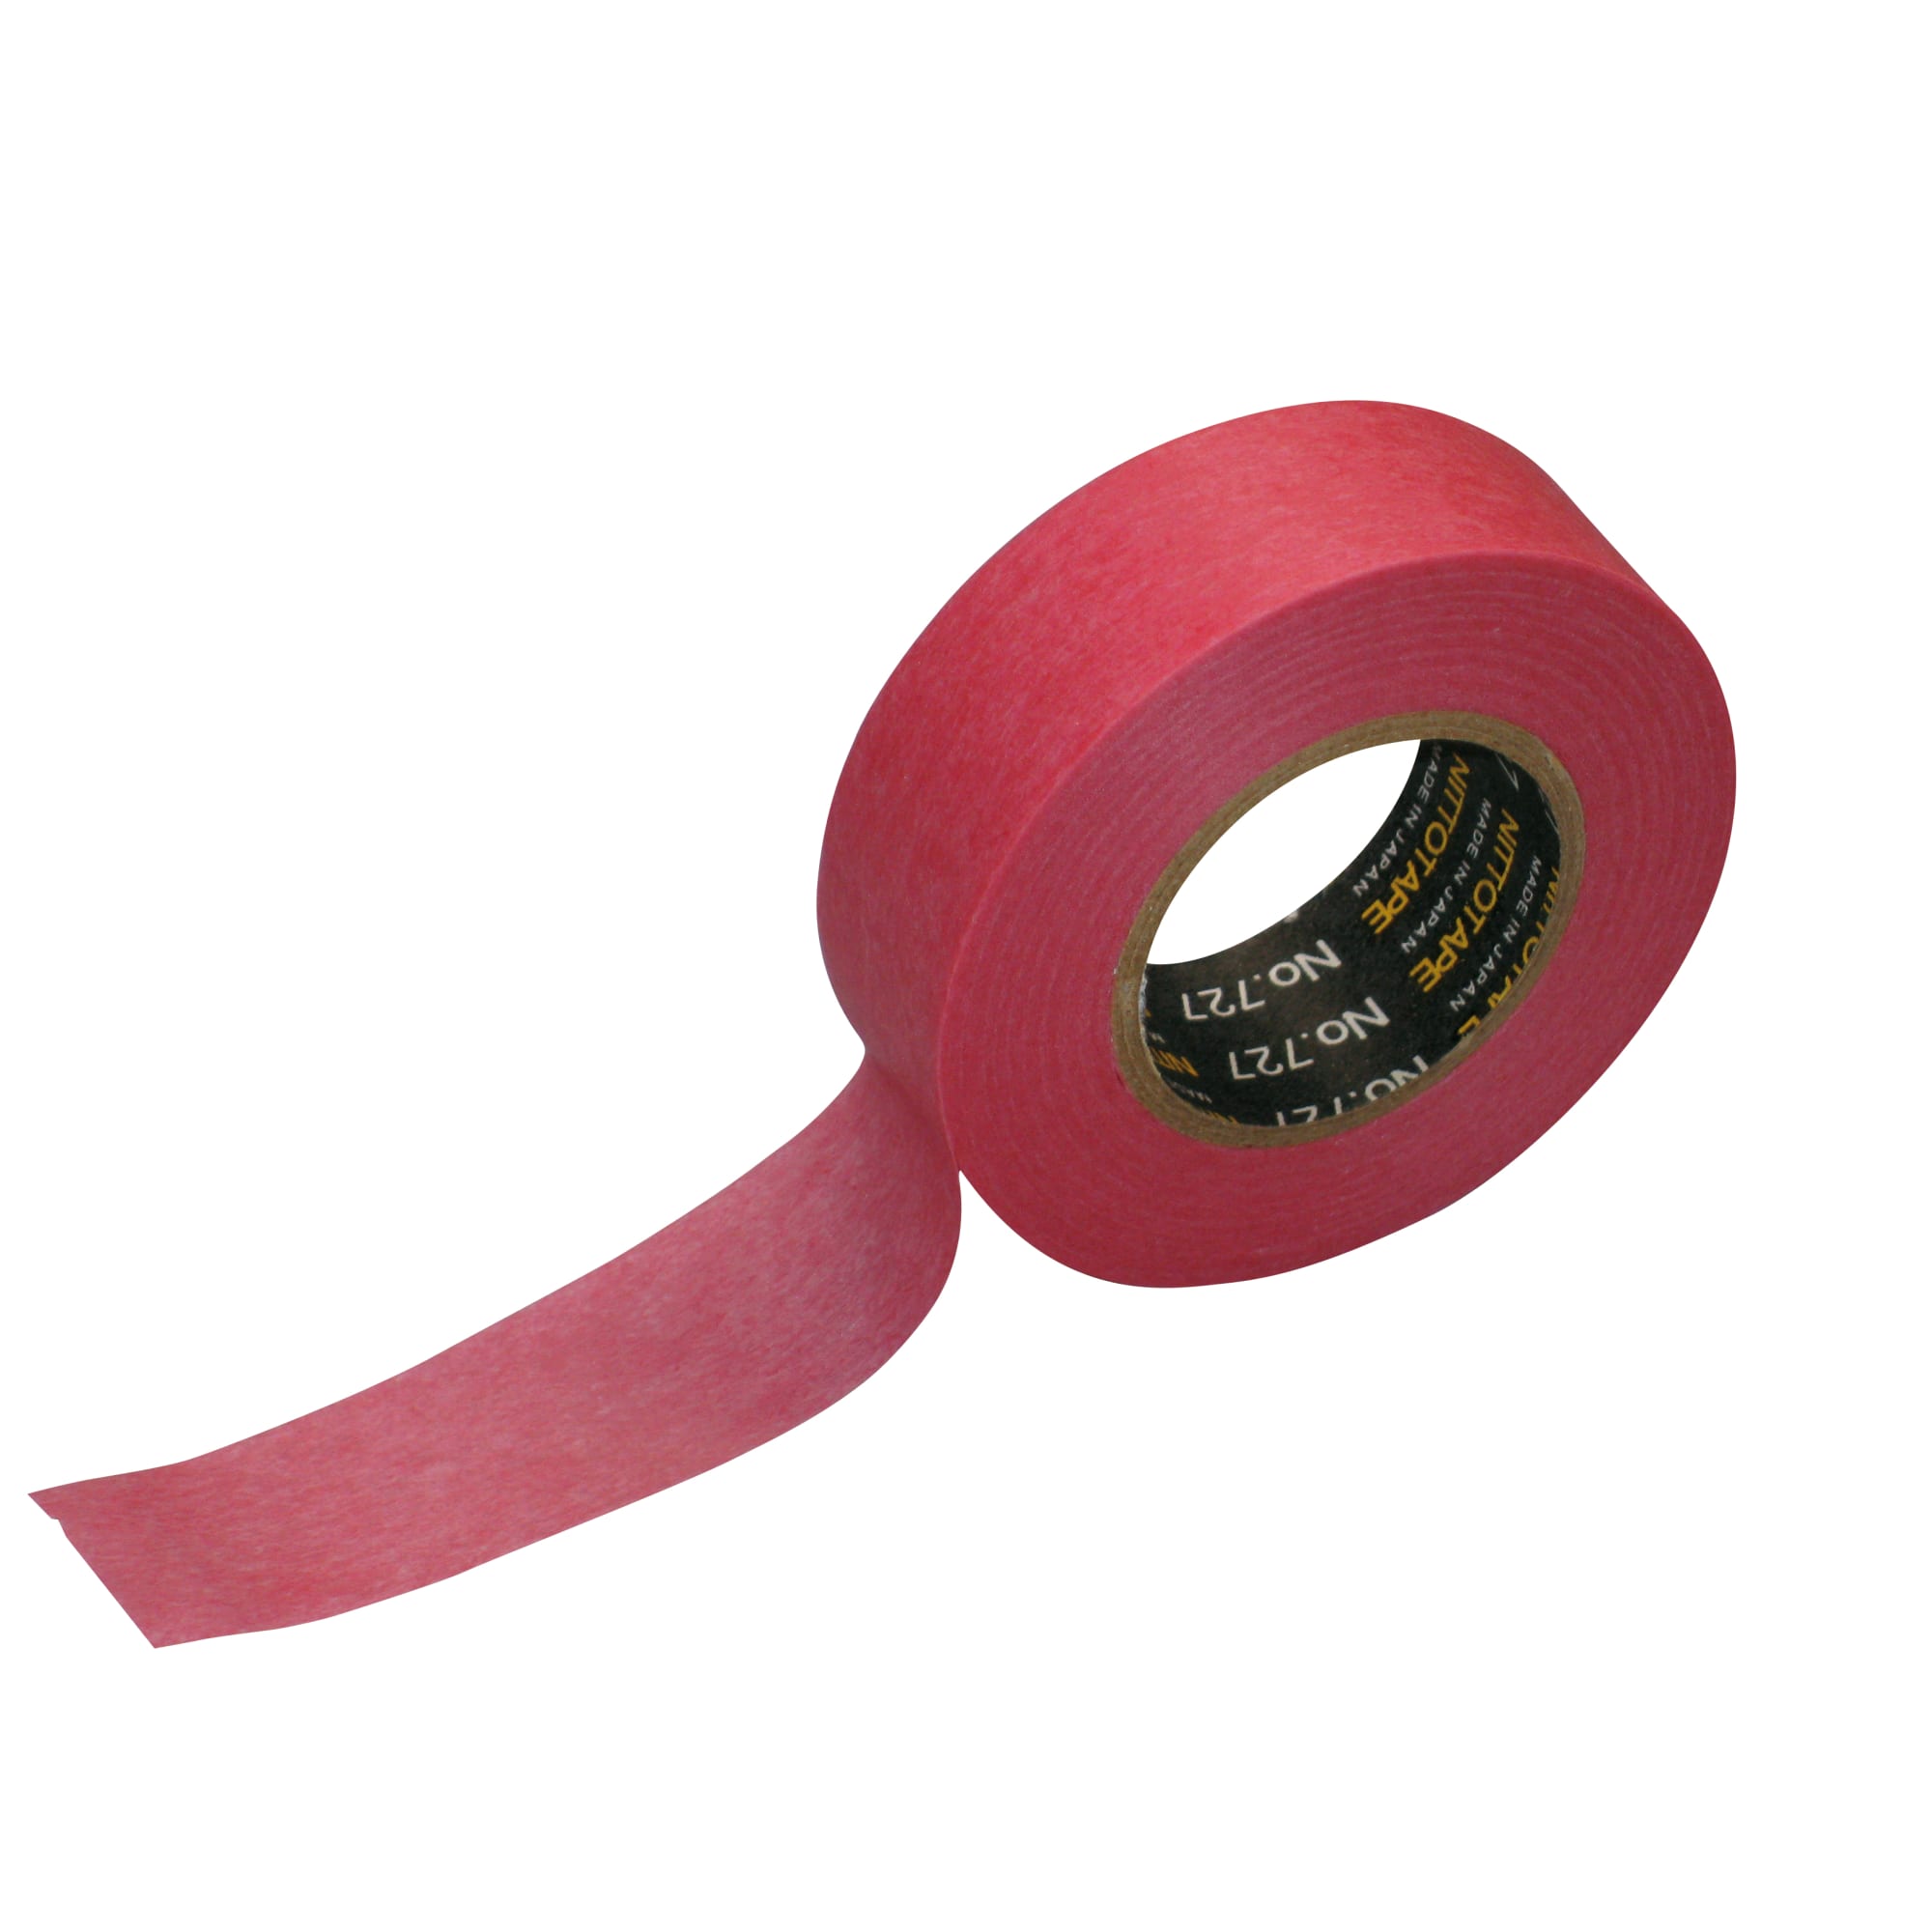 Silicone Heat-Resistant Grip Tape